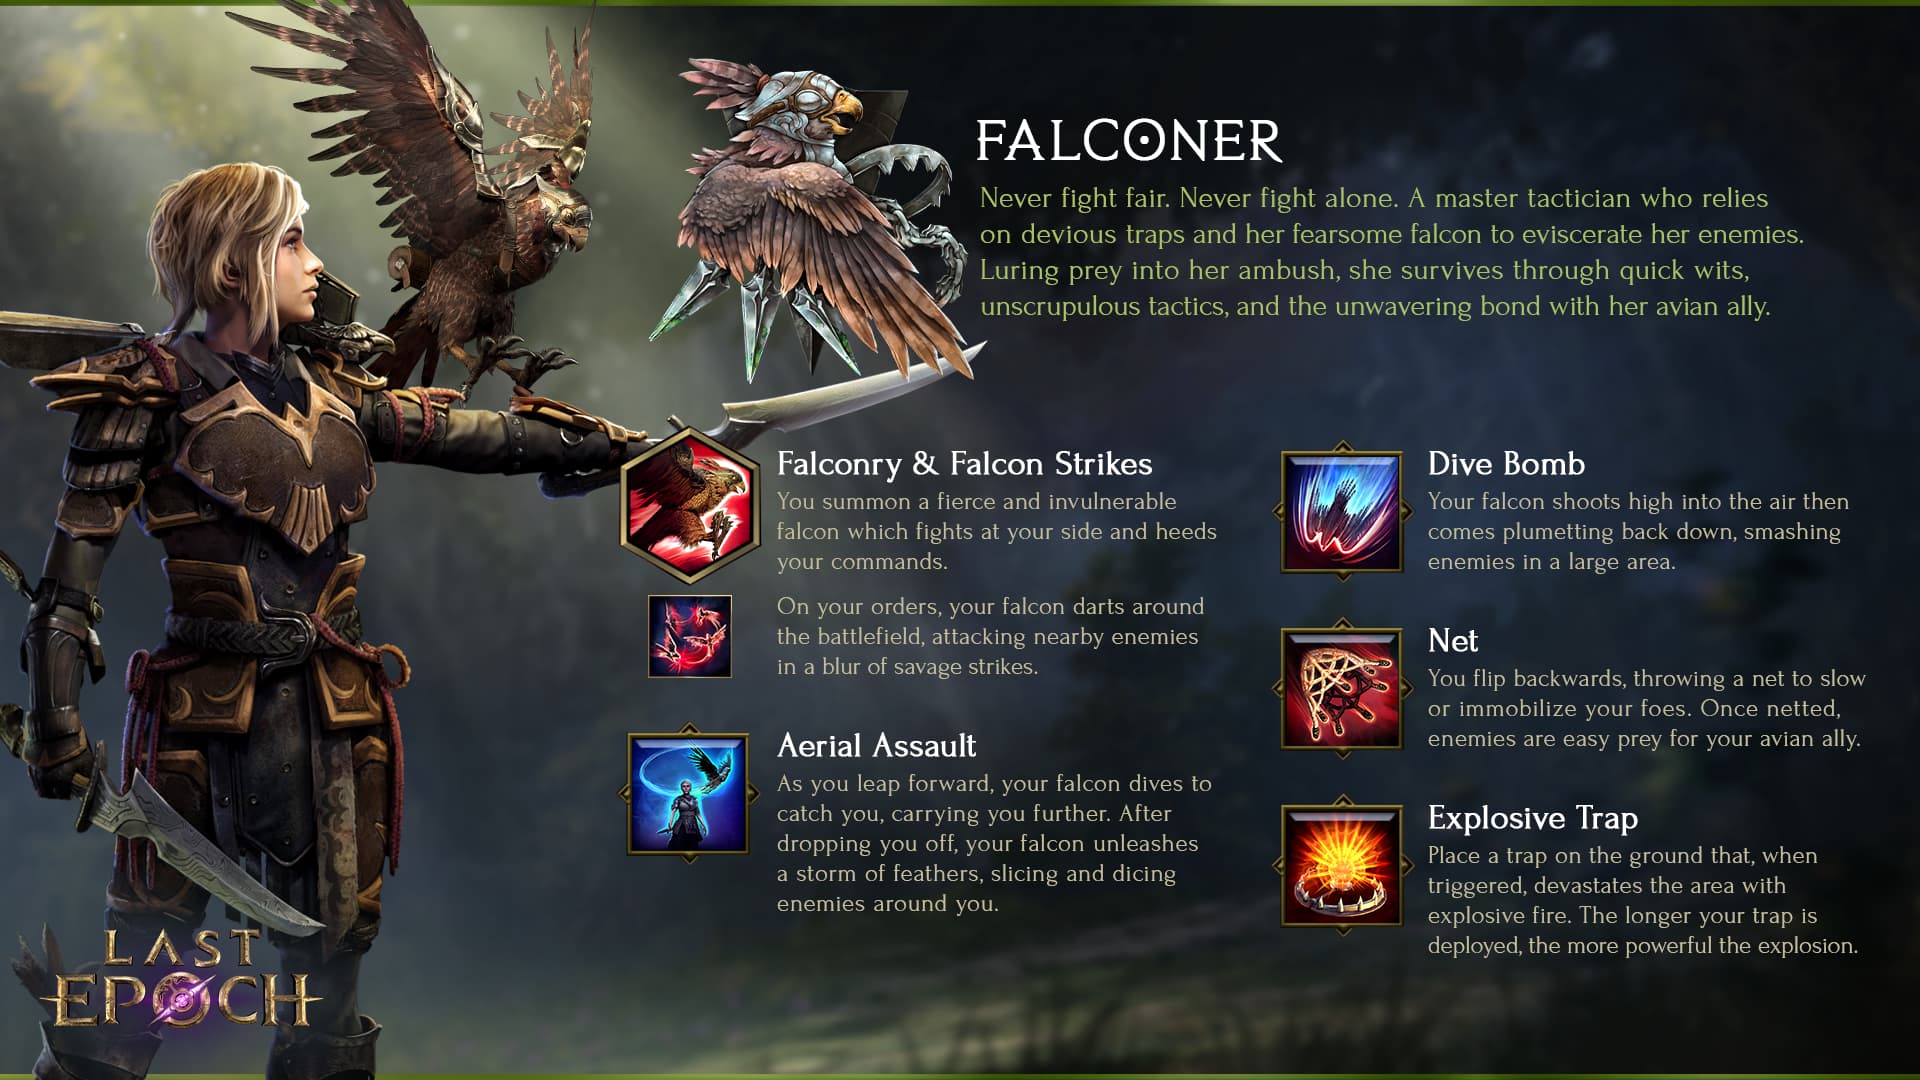 A promotional image of the Falconer mastery from The Last Epoch.